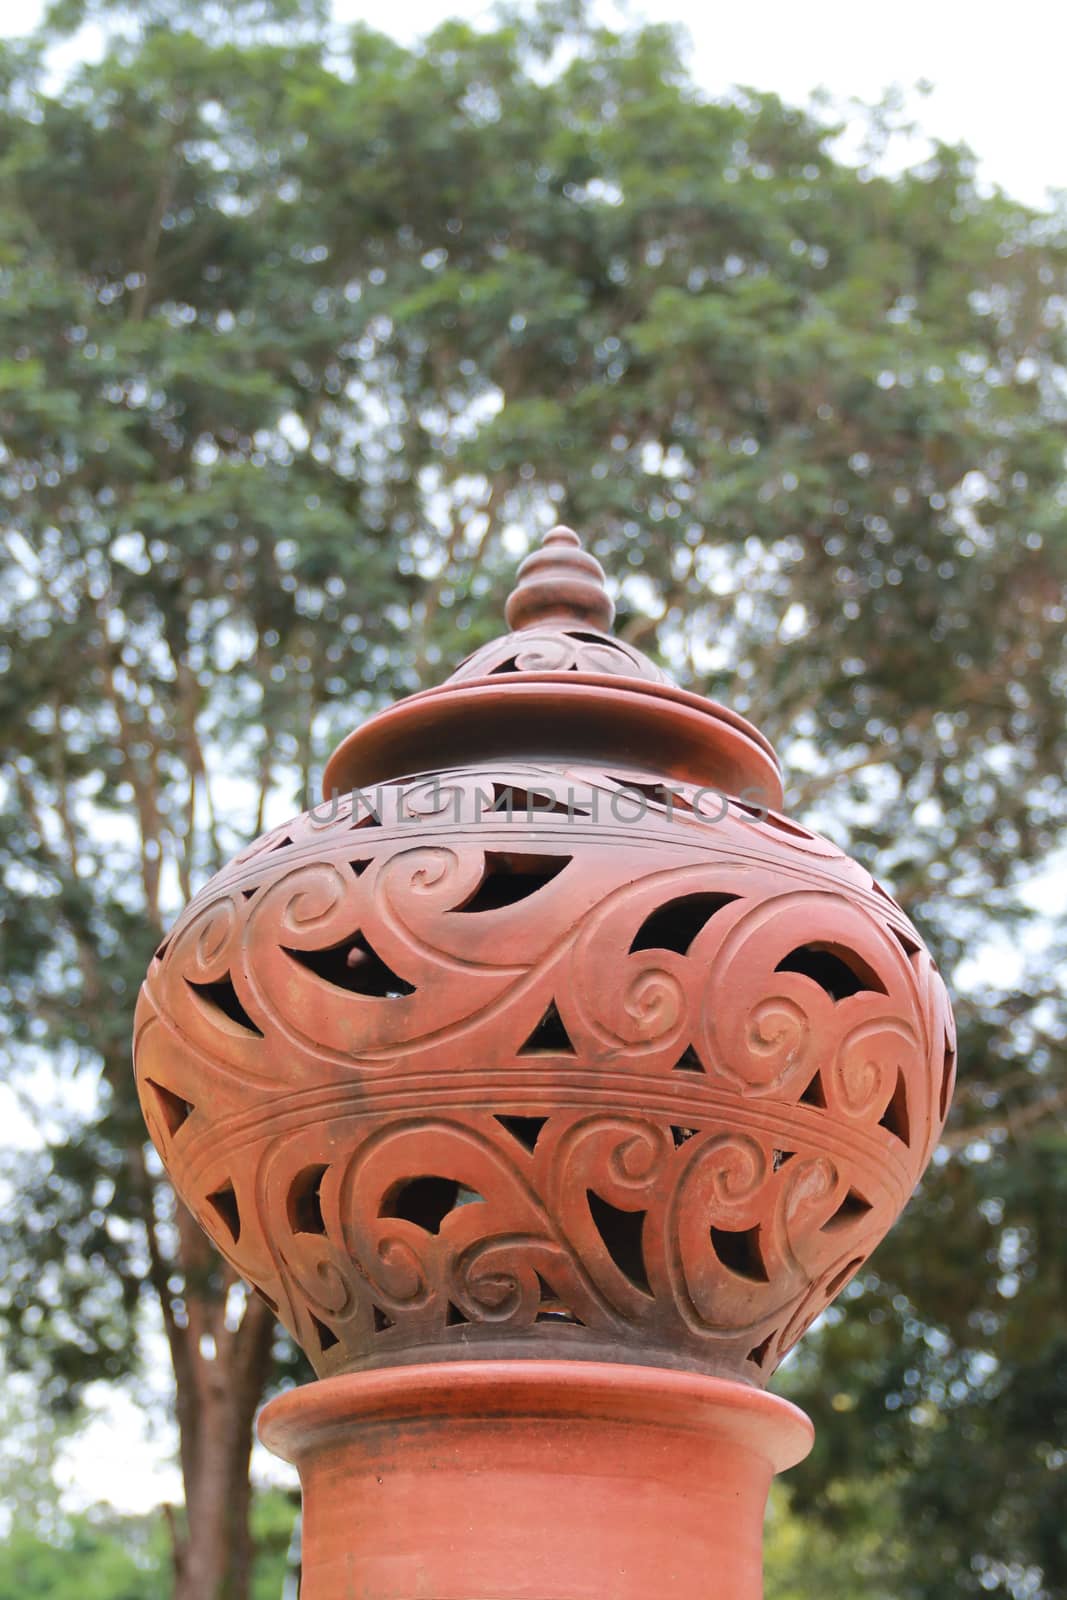 Thai pottery lamps are decor on the poles.This folk artwork is common apparent in Thailand.